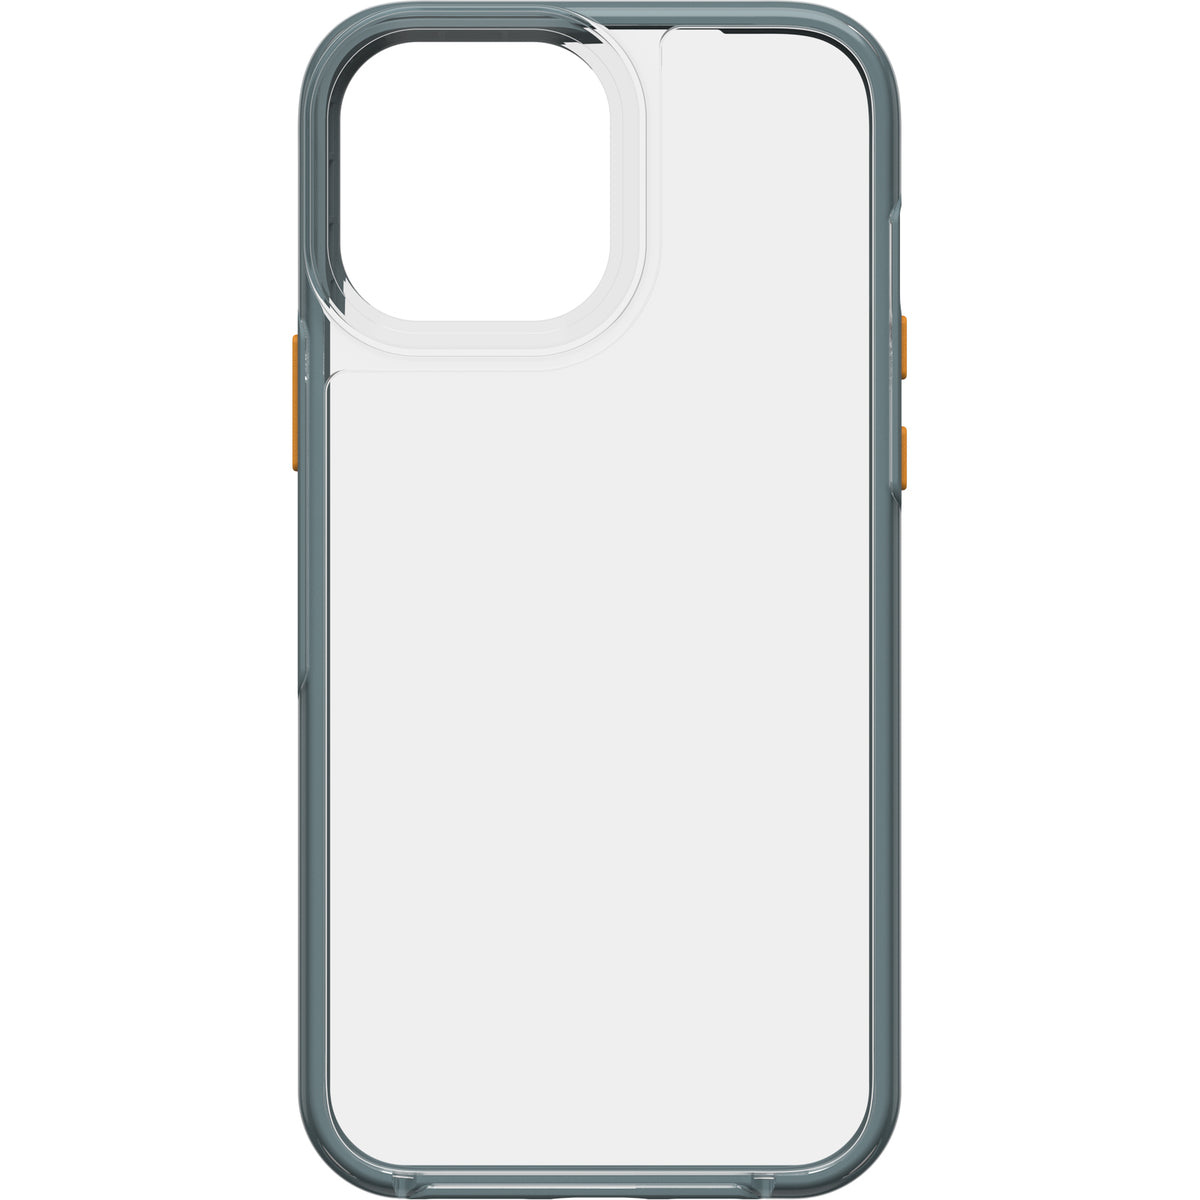 LifeProof See iPhone 13 Pro Max / iPhone 12 Pro Max Zeal Grey - transparente/gris